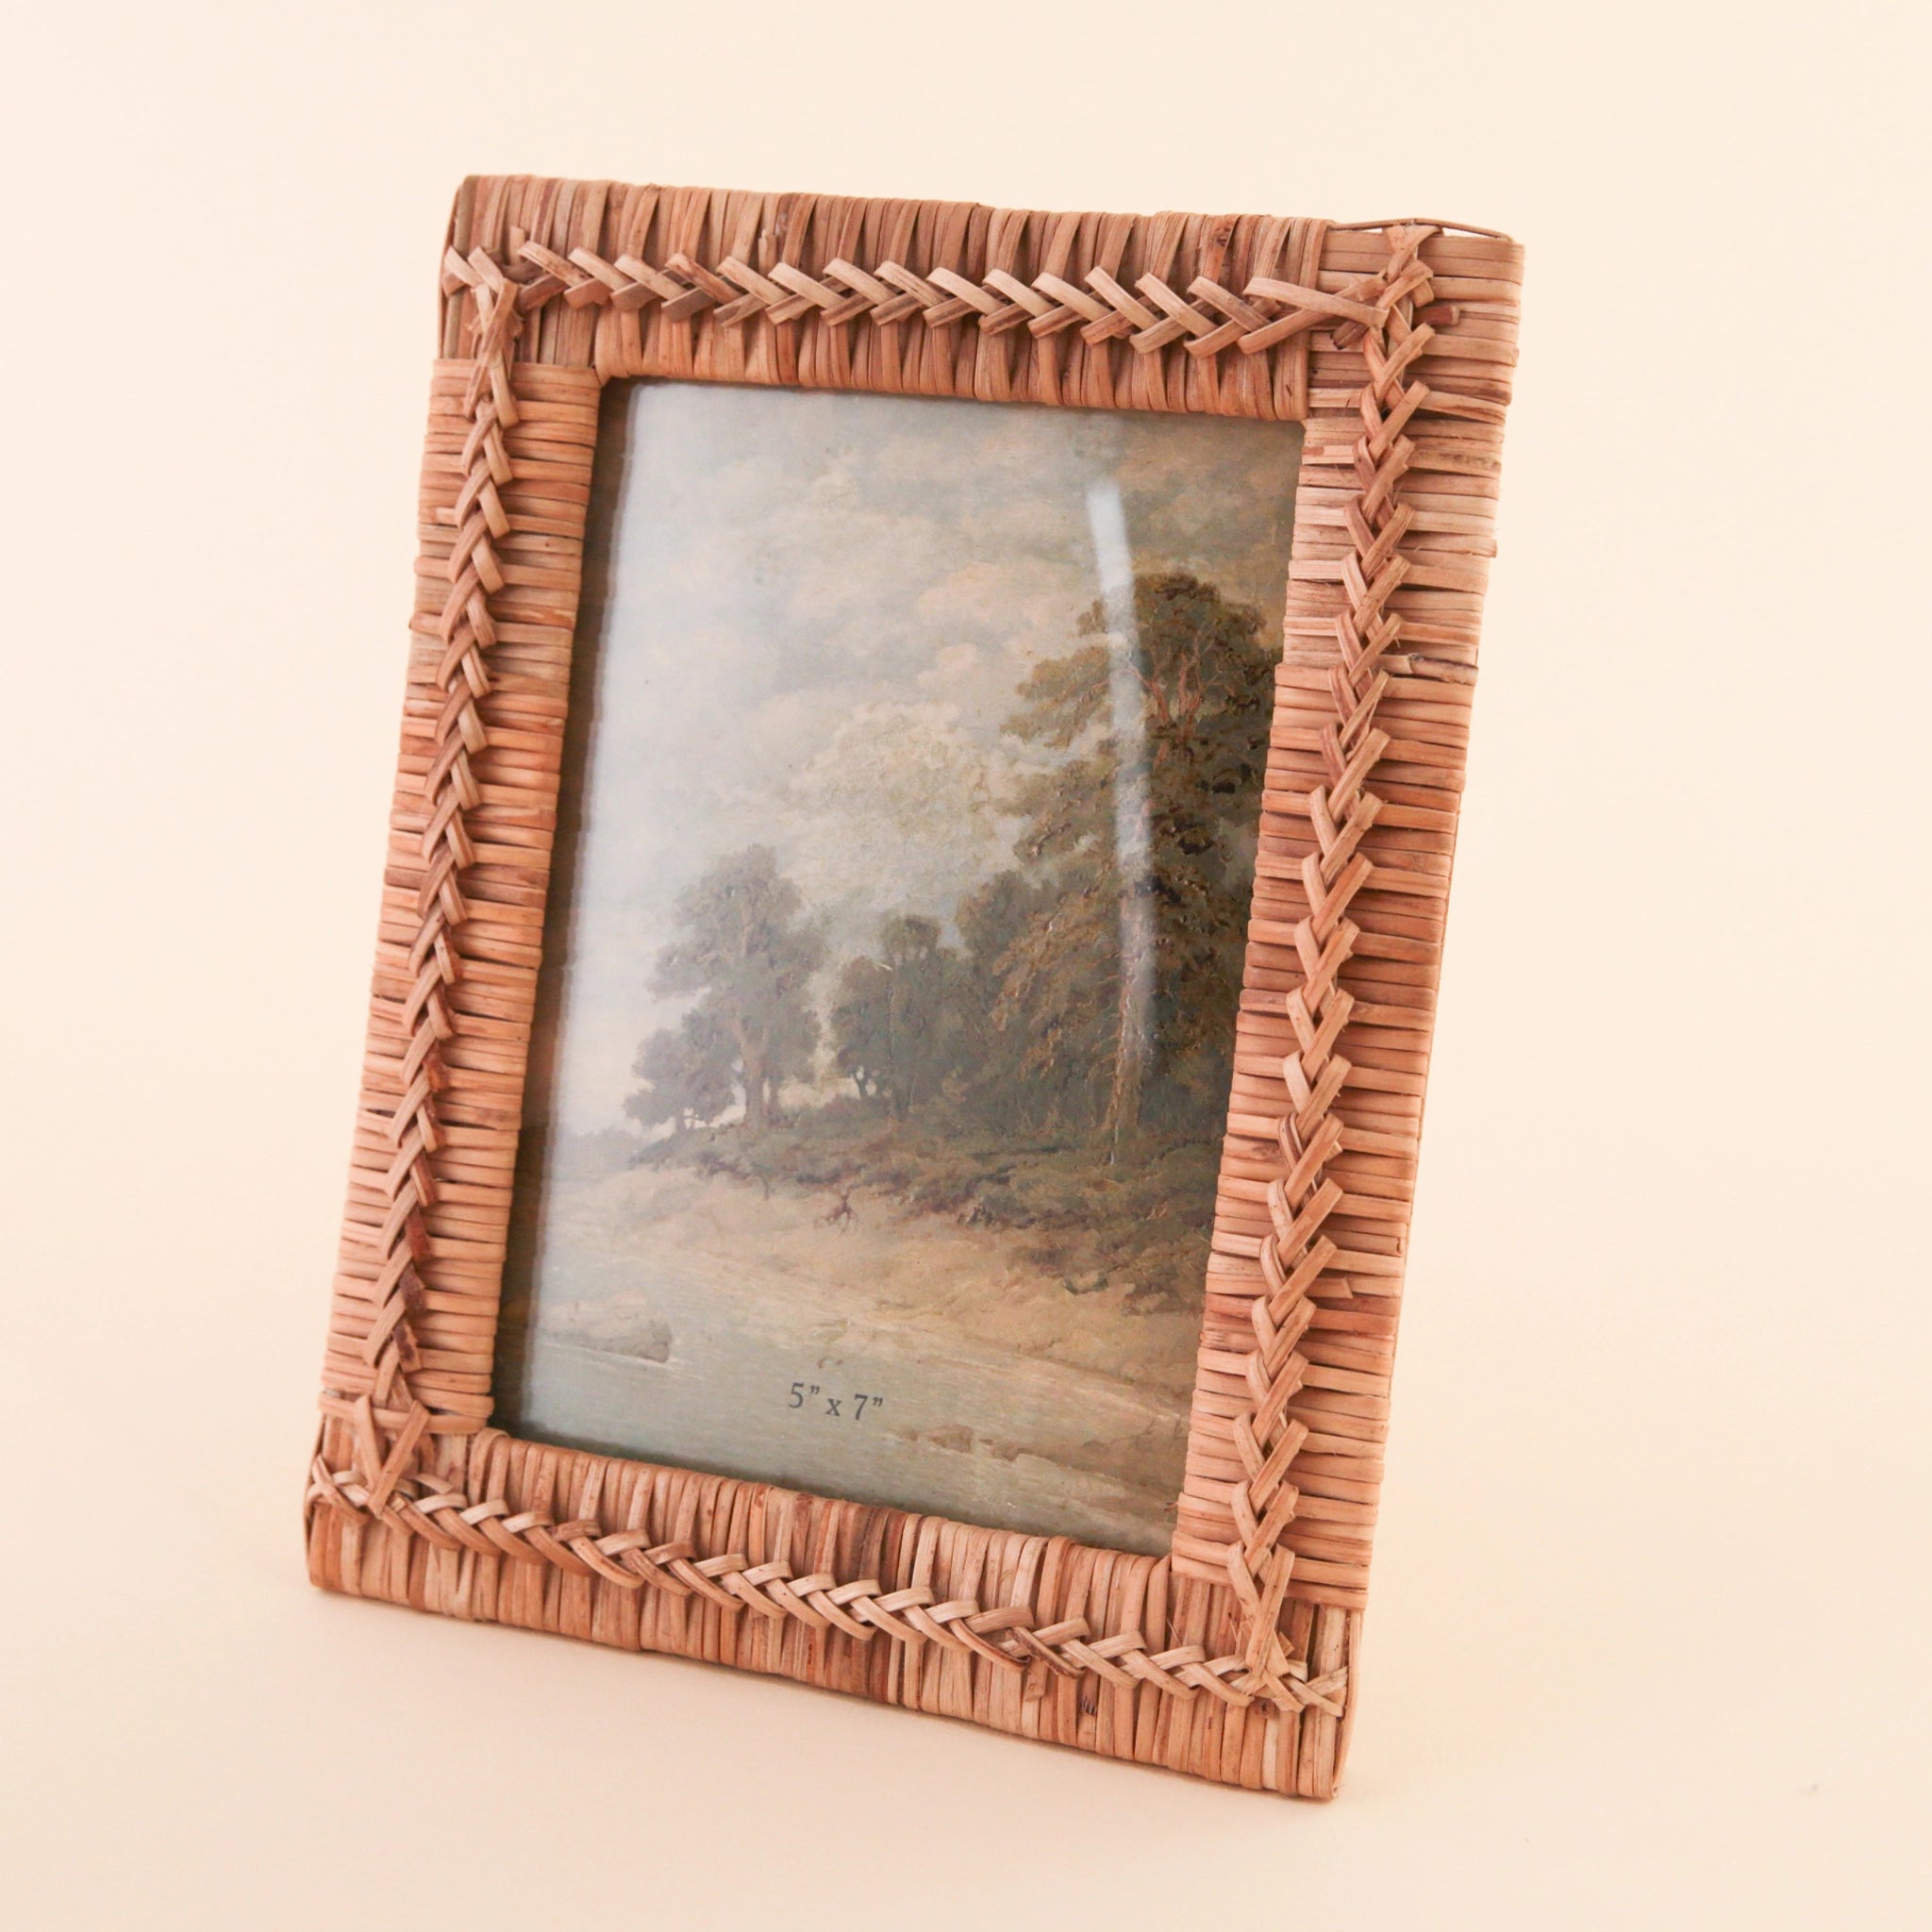 A 5" x 7" hand woven rattan frame a natural brown shade detailed with intricate stitching int he center.